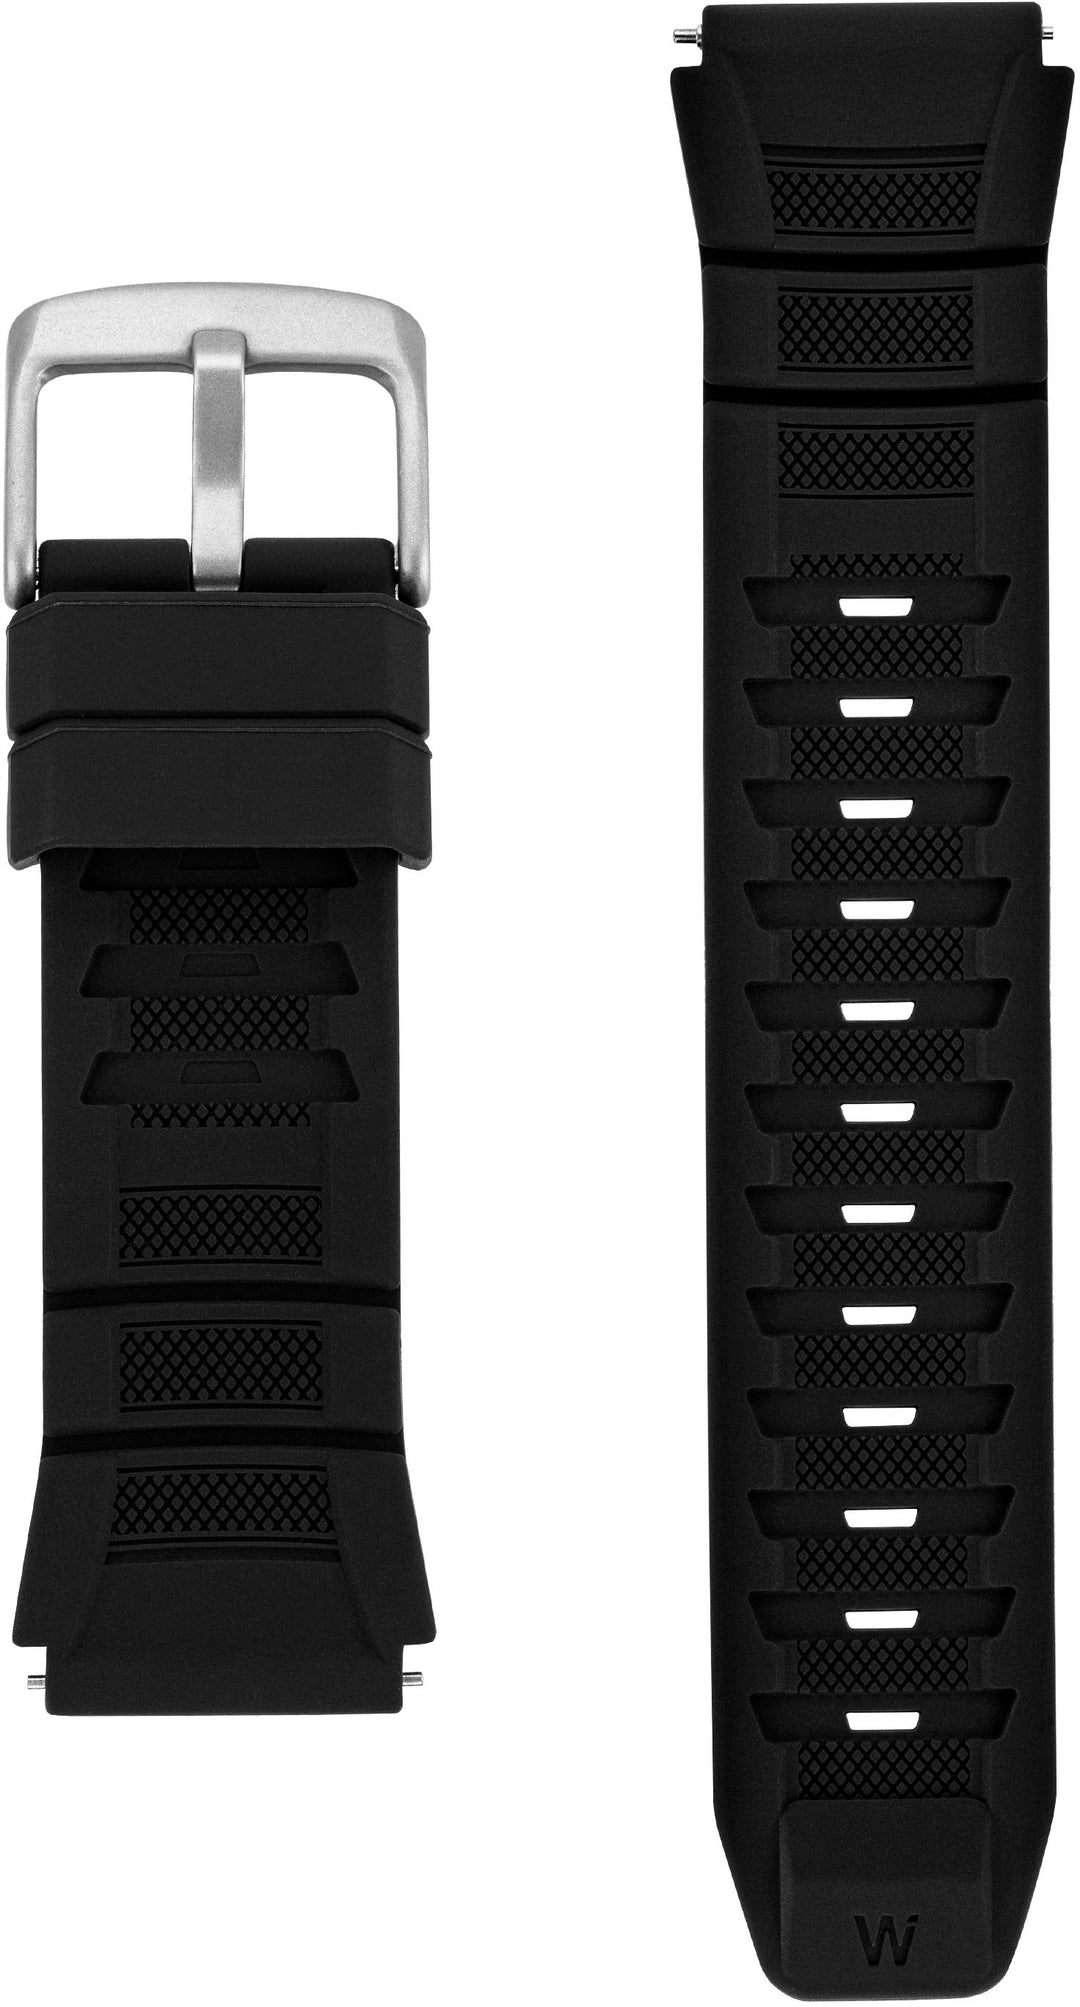 WITHit - Sport Iconic Silicone Band and Stainless Steel Link Bracelet for 20mm Samsung Galaxy 6 (2-Pack) - Black_1